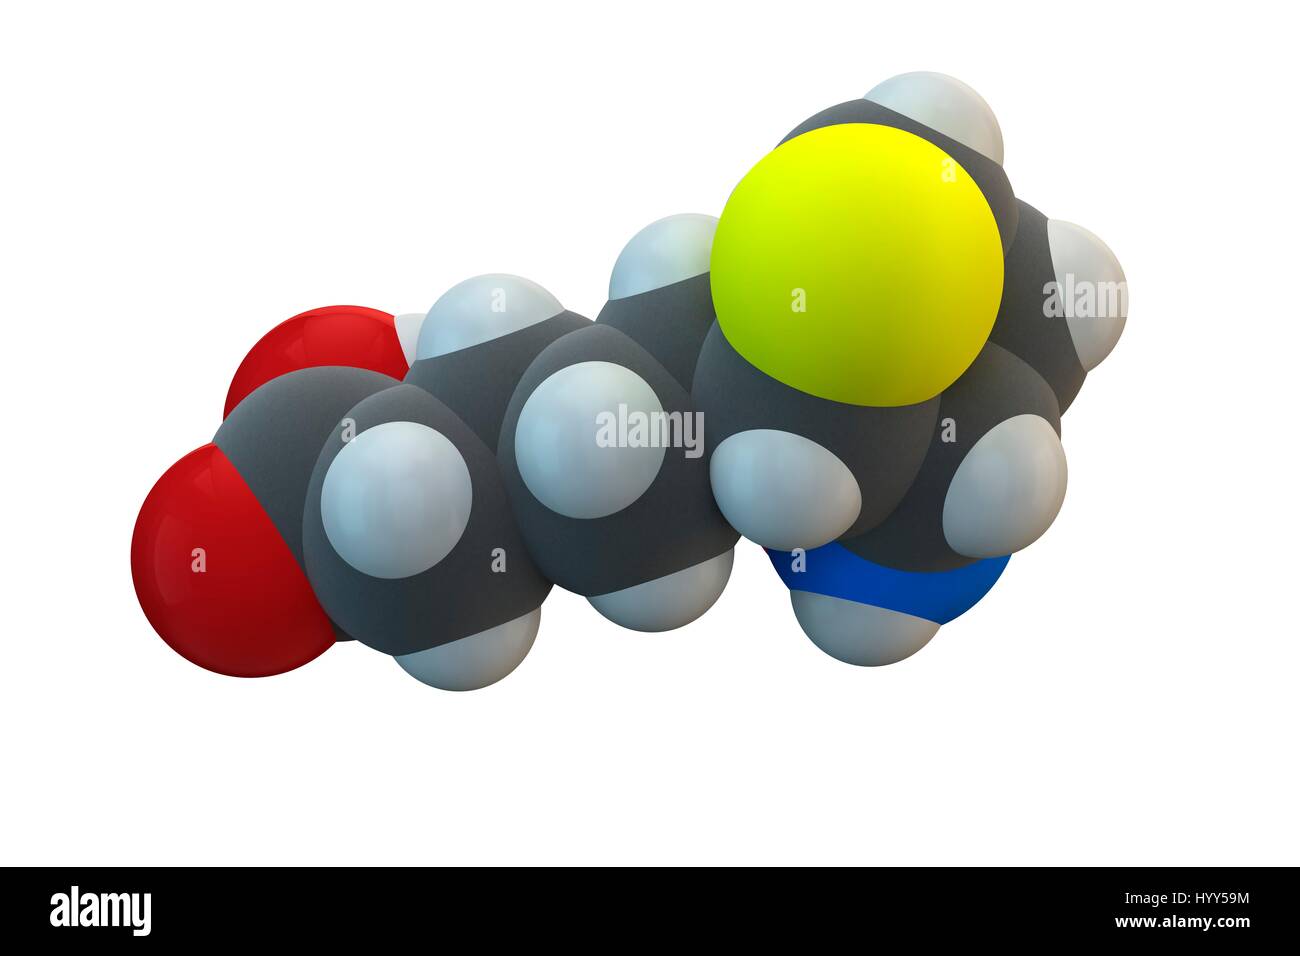 Vitamin B7. Molecular model of biotin, also known as vitamin B7, vitamin H and coenzyme R. This vitamin is required for cell growth, the production of fatty acids, and the metabolism of fats and amino acids. Chemical formula is C10H16N2O3S. Atoms are represented as spheres: carbon (grey), hydrogen (white), nitrogen (blue), oxygen (red), sulphur (yellow). Illustration. Stock Photo